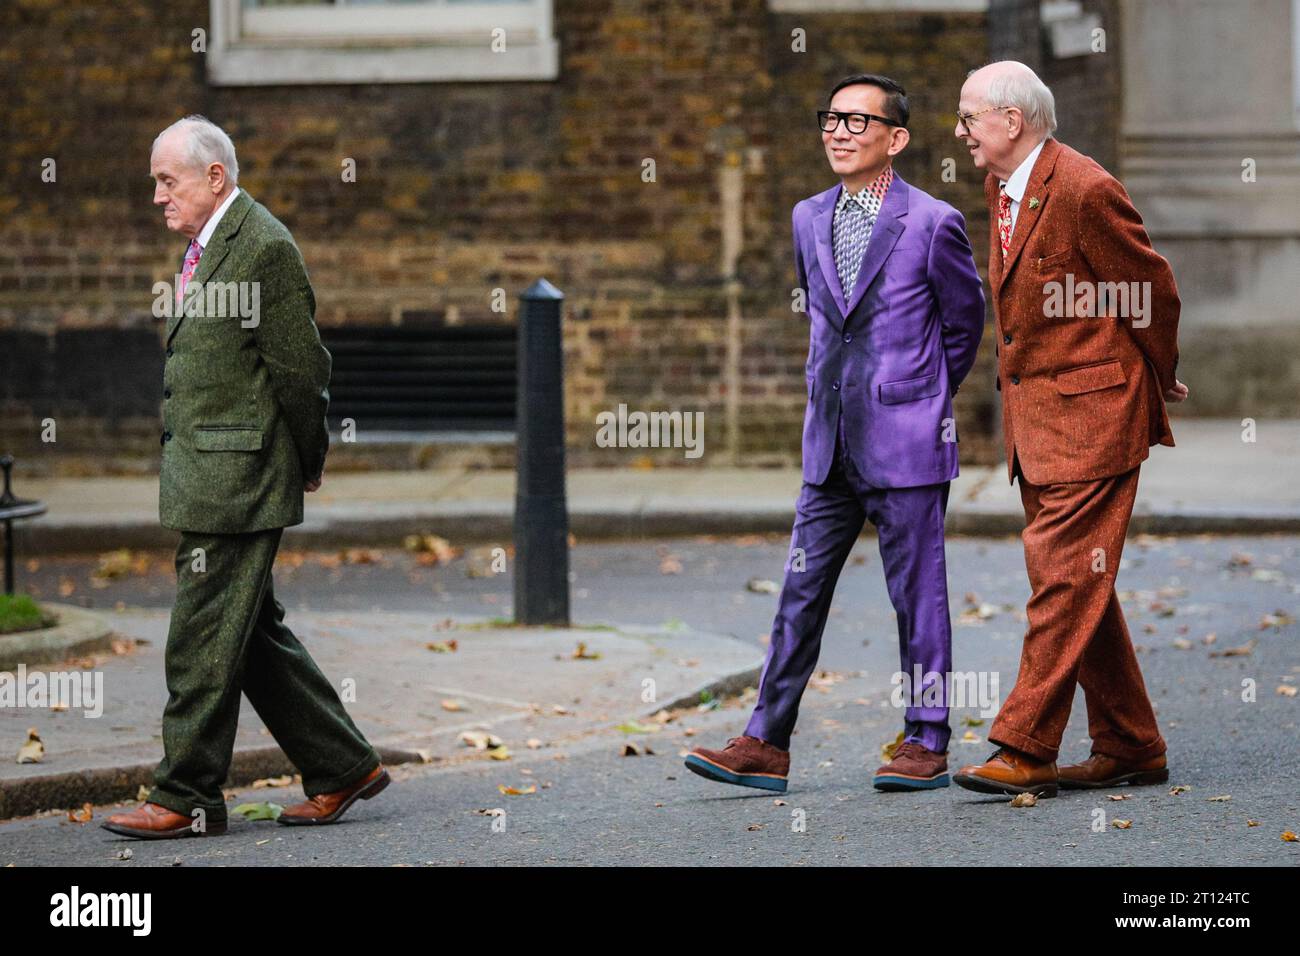 London, UK. 10th Oct, 2023. British artist duo Gilbert and George (Gilbert Prousch, sometimes referred to as Proesch, and George Passmore) attend a reception at 10 Downing Street with an associate (middle) to celebrate 20 years of Frieze London Art Fair. They arrive together with other invitees. Frieze 2023 will officially start tomorrow with its preview day. Credit: Imageplotter/Alamy Live News Stock Photo